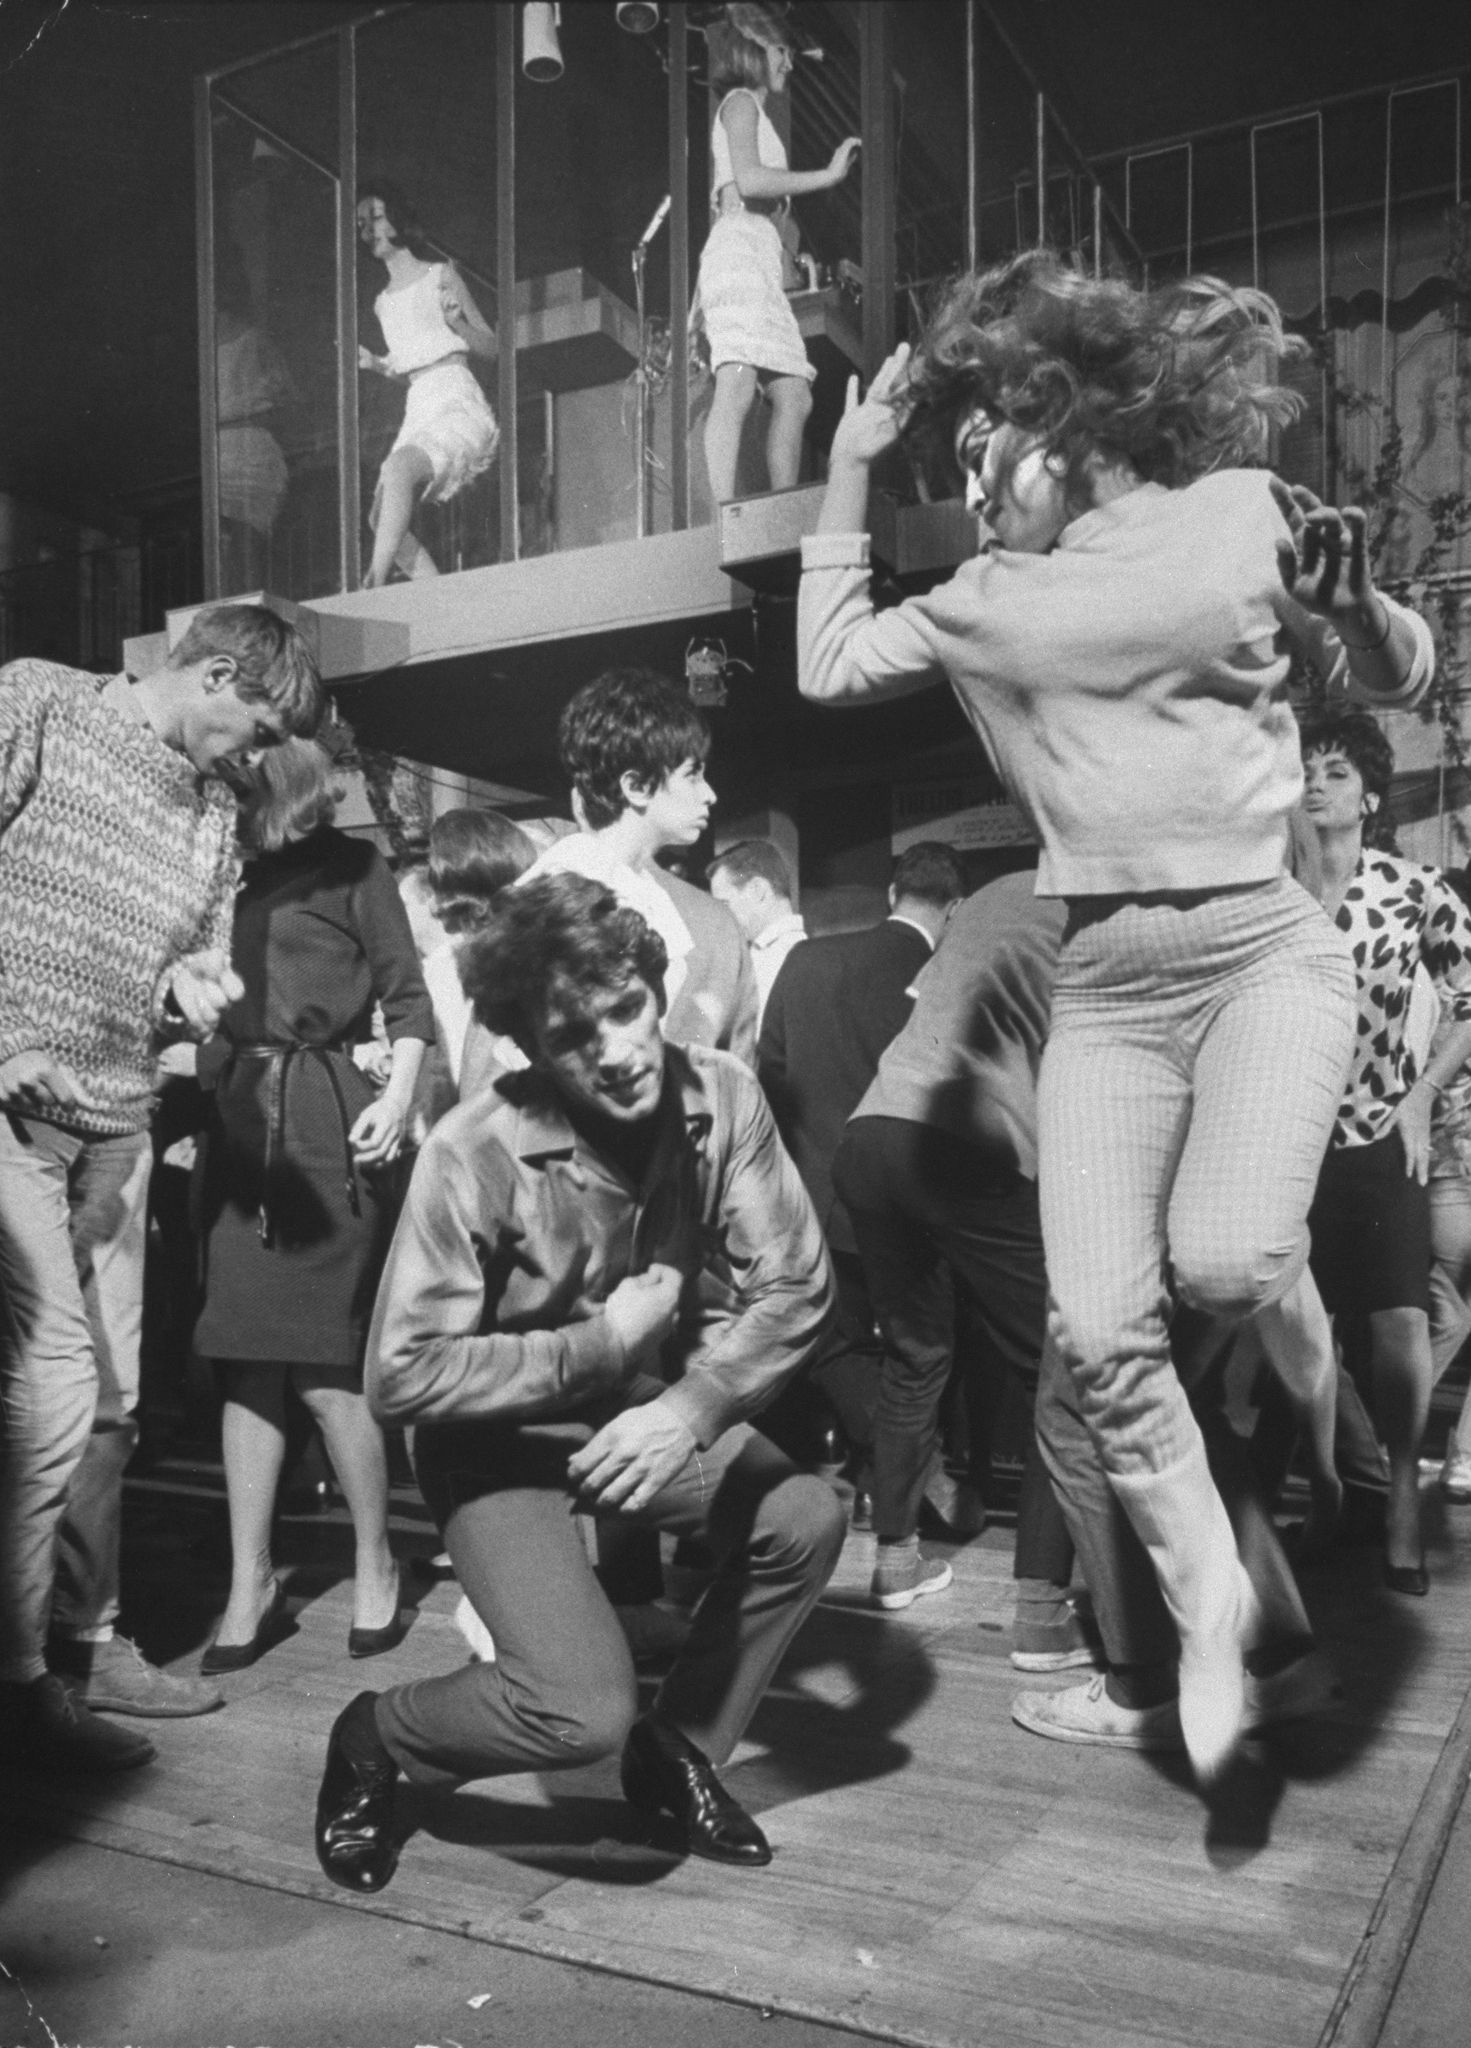 Rock and Roll Dance: The Sunset Strip, Hollywood Of 60s, Vintage Dance Party, Black And White. 1480x2050 HD Wallpaper.